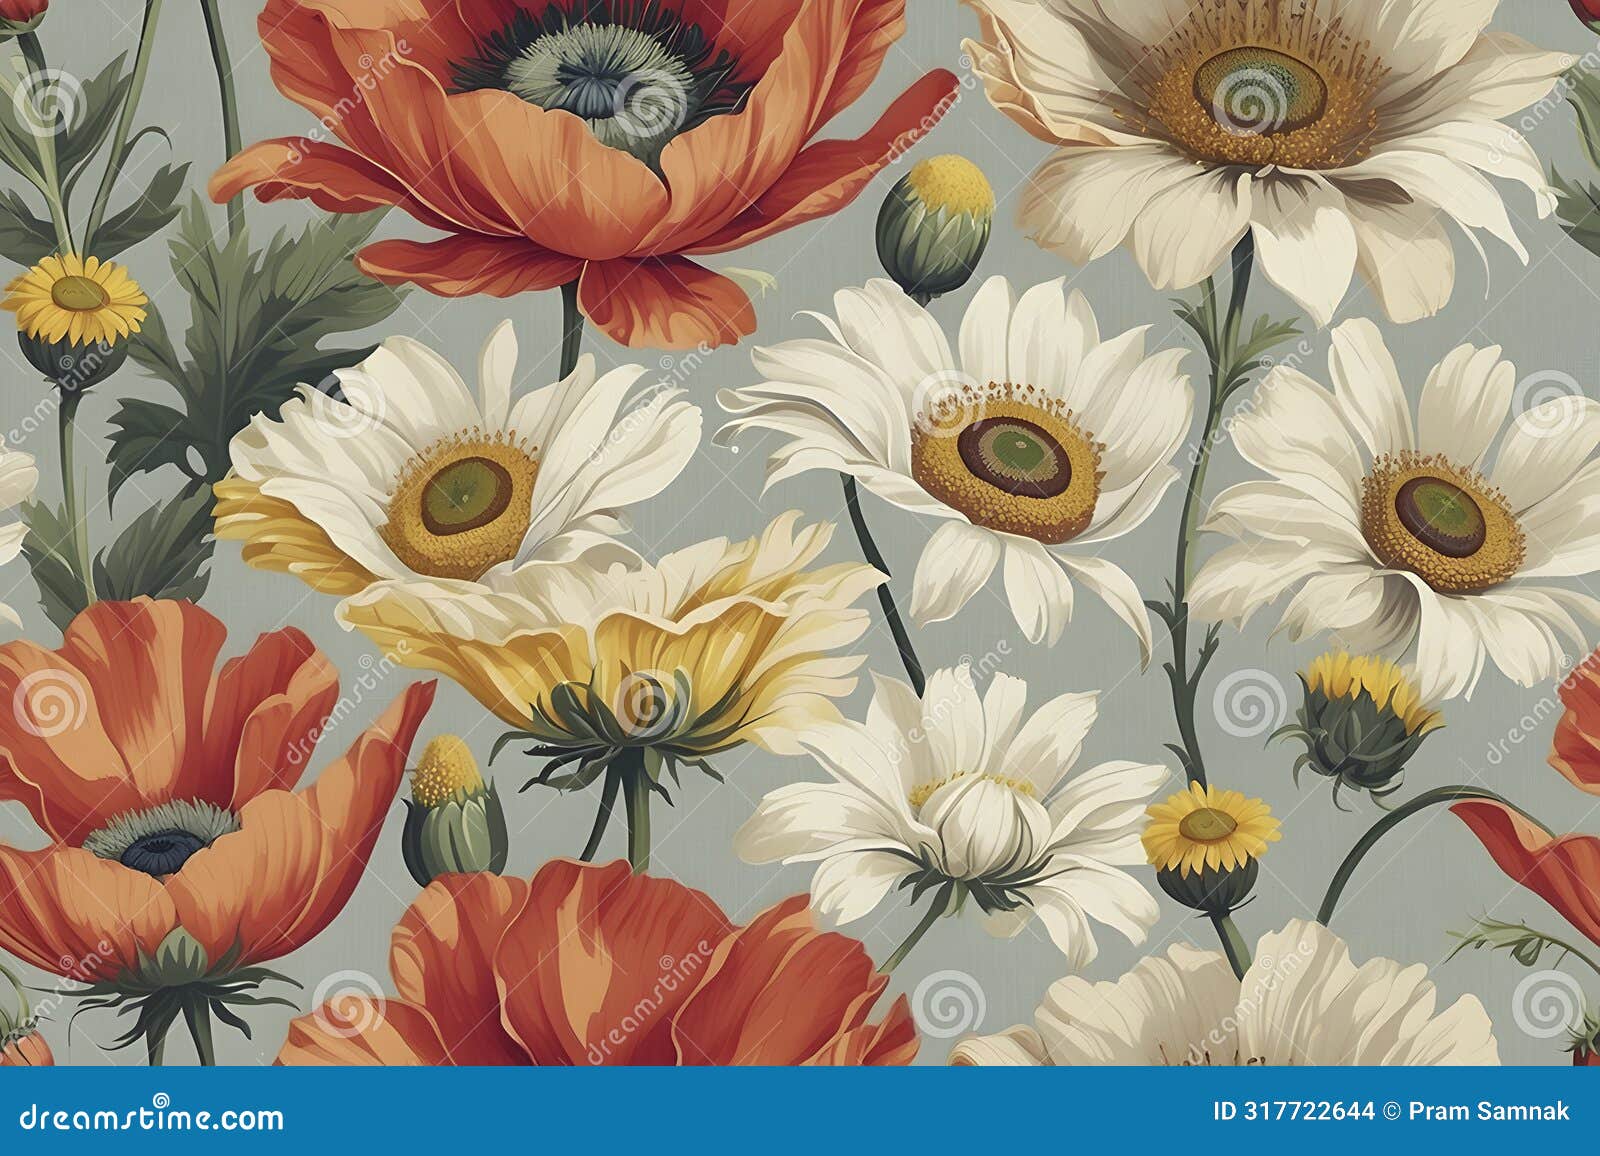 a seamless pattern of floral chintz pattern reminiscent of the 1940s.